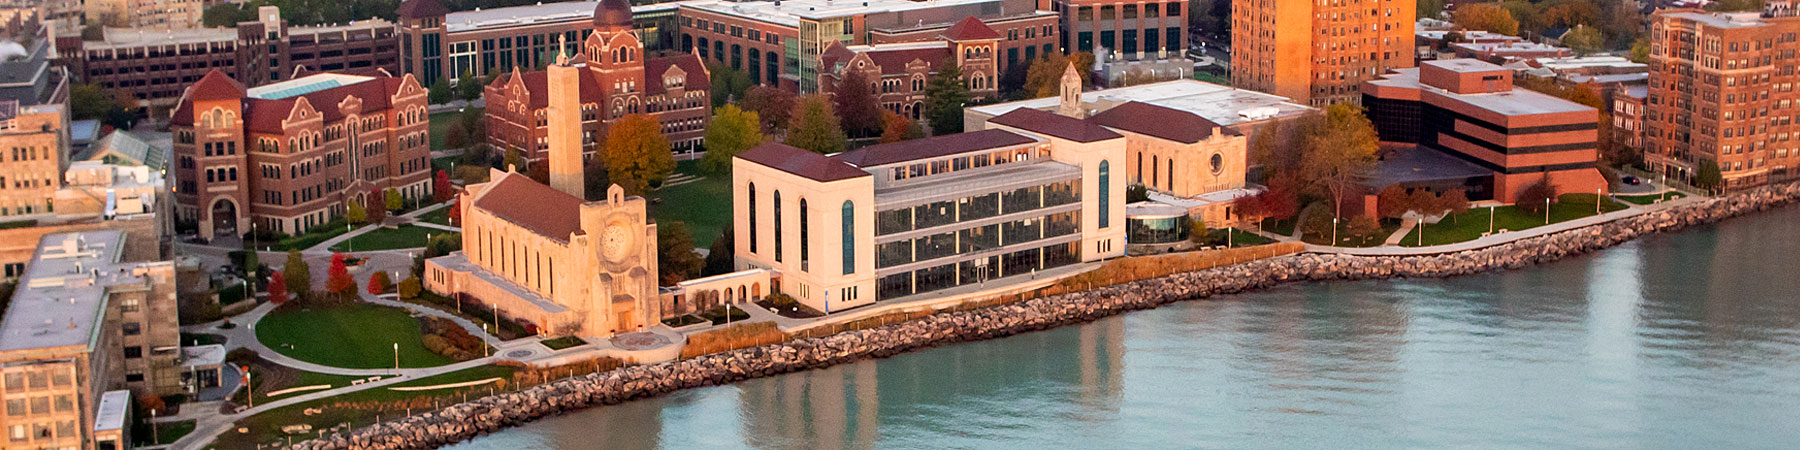 An aerial view of Loyola University Chicago's Lake Shore Campus from lakeside with beautiful cumulus clouds in the sky